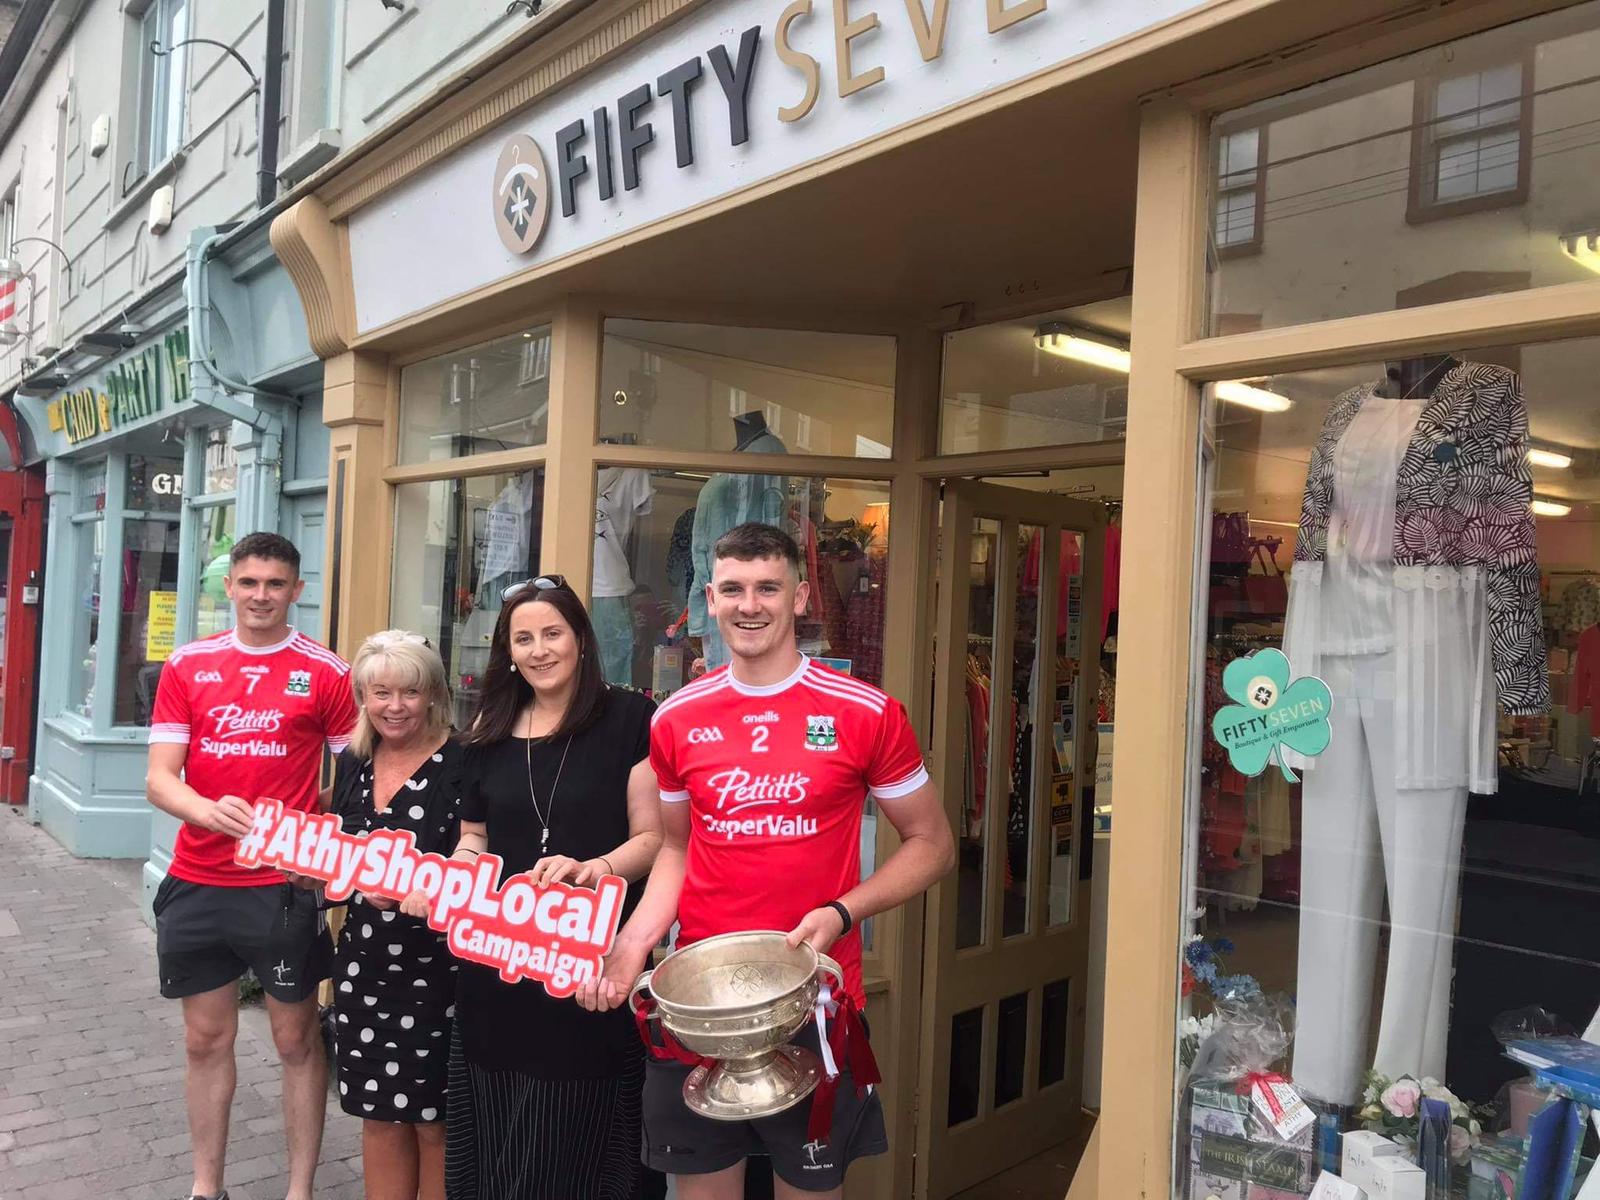 Fifty Seven Sale Shop Athy